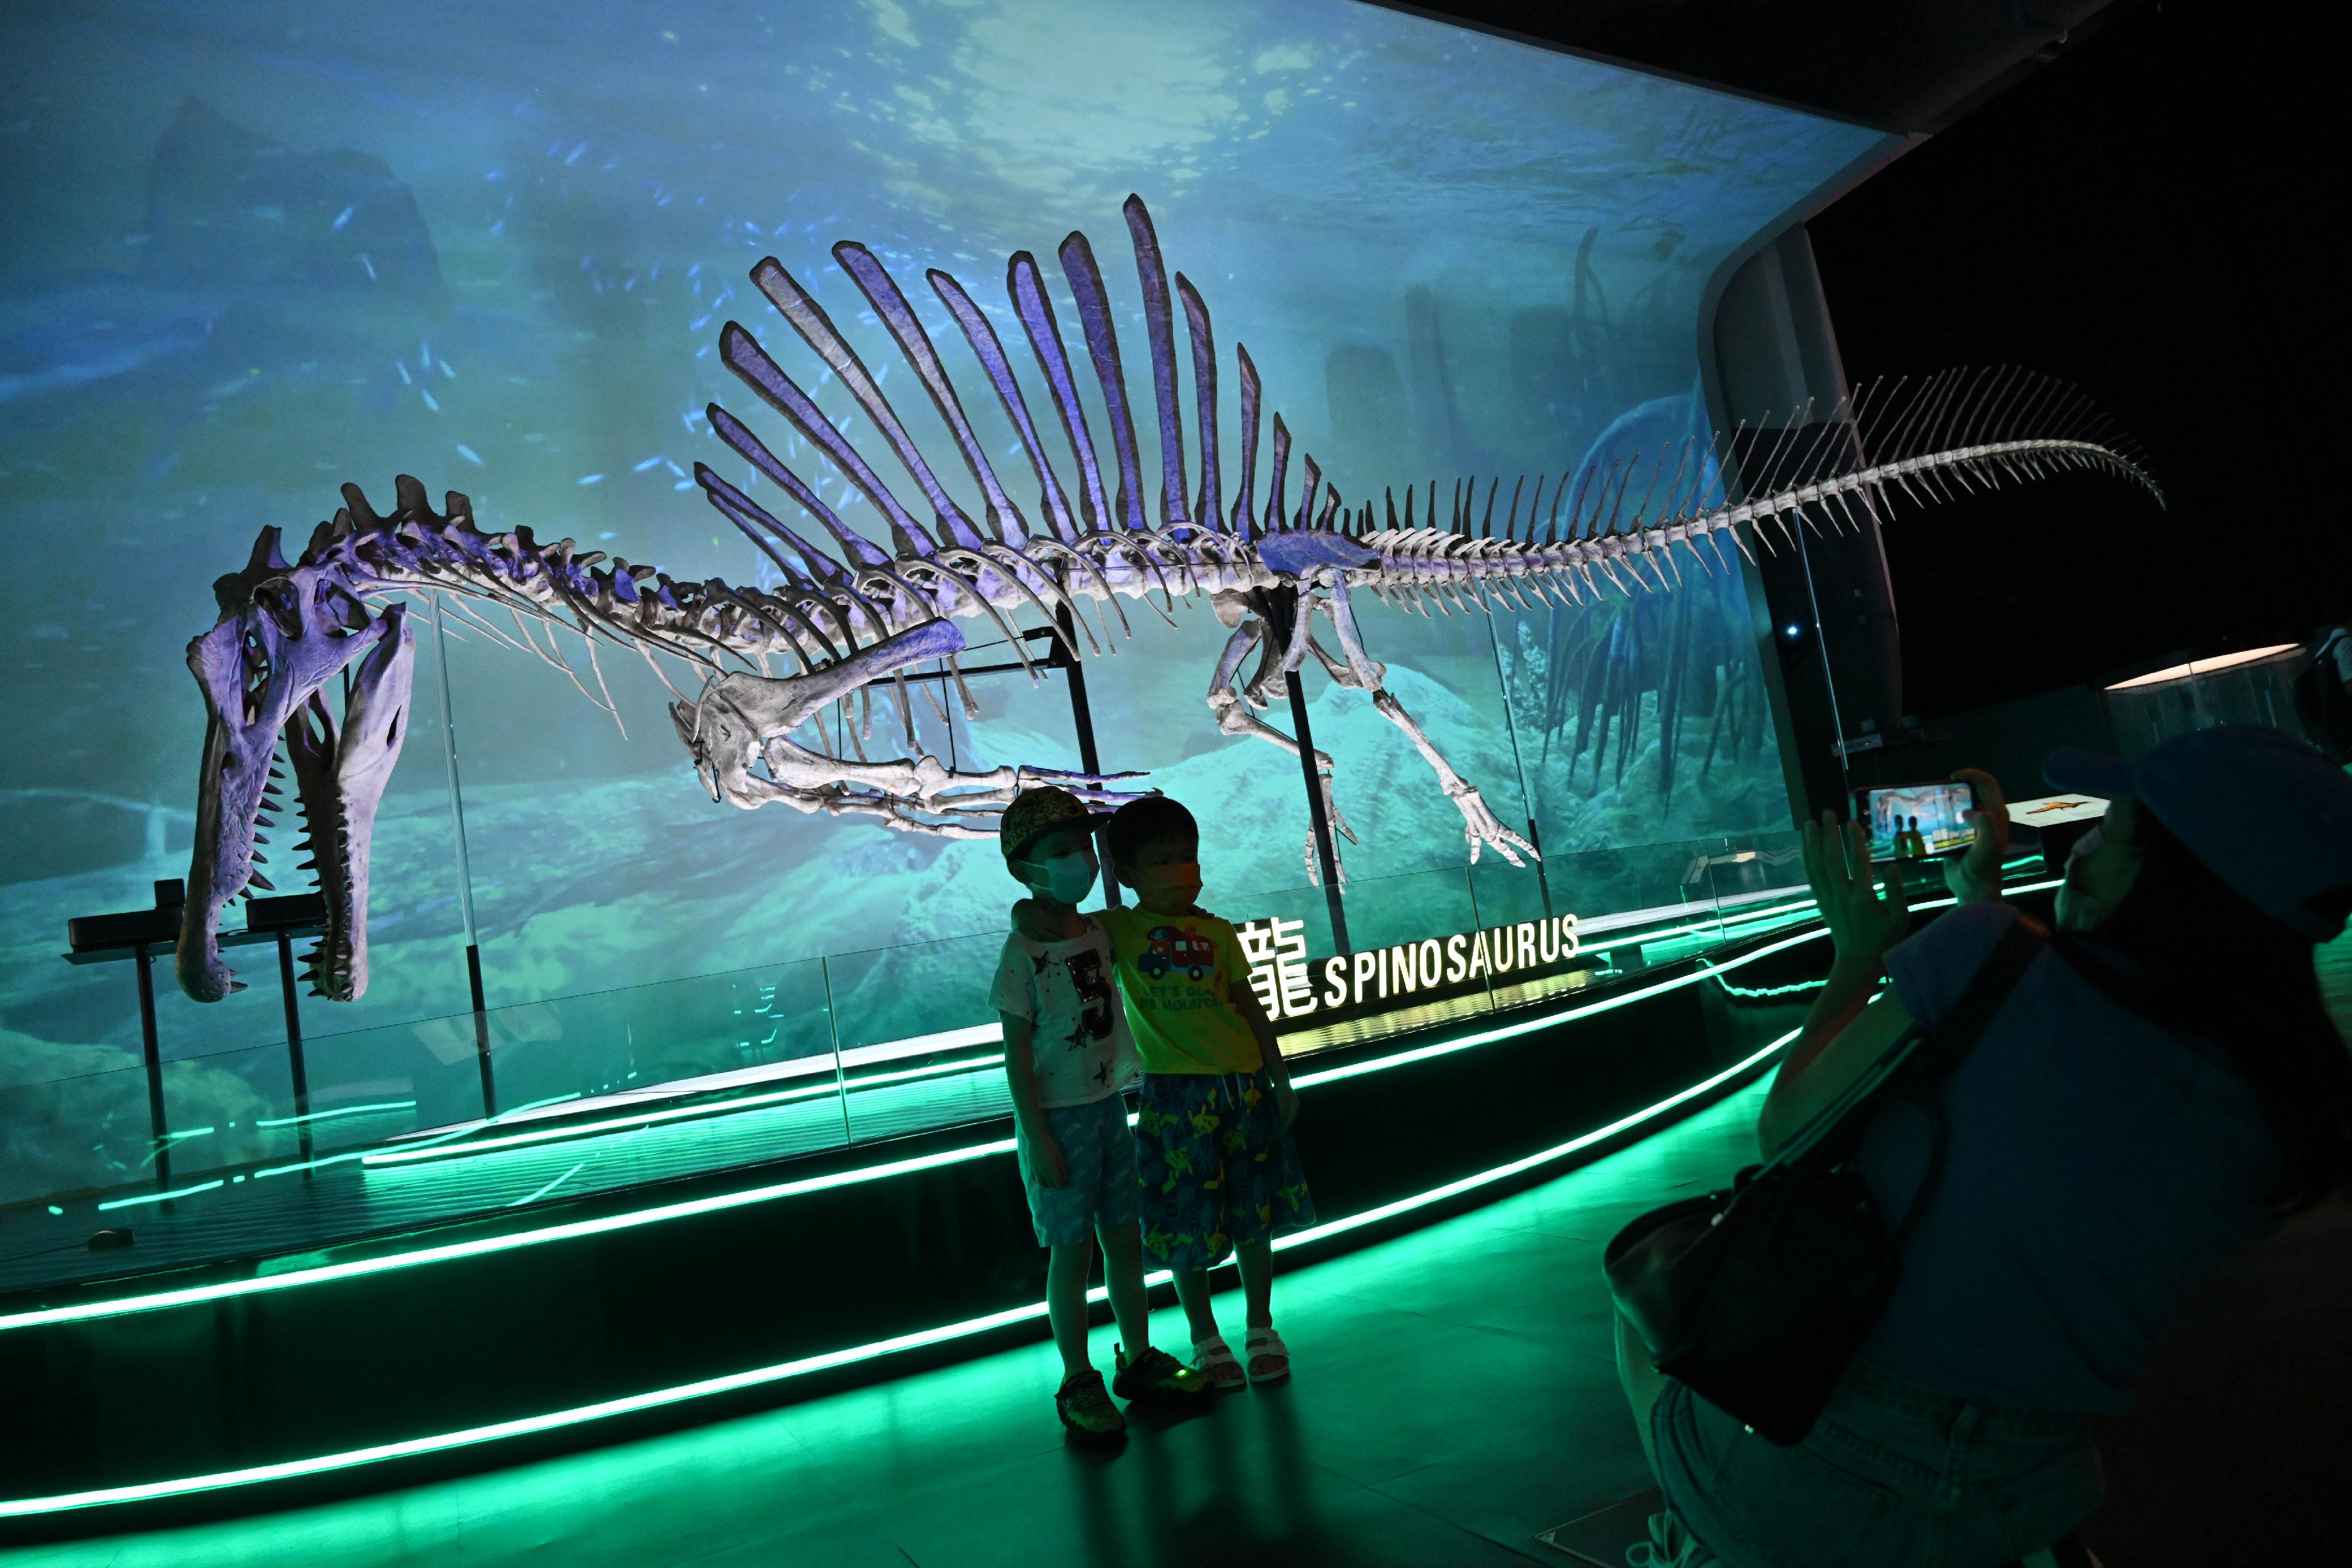 The Hong Kong Science Museum's free large-scale dinosaur exhibition, "The Hong Kong Jockey Club Series: The Big Eight - Dinosaur Revelation" has received an overwhelming public response since its opening in July. Picture shows visitors taking a photo with the 1:1 reconstructed skeleton model of the Spinosaurus in the exhibition gallery. 